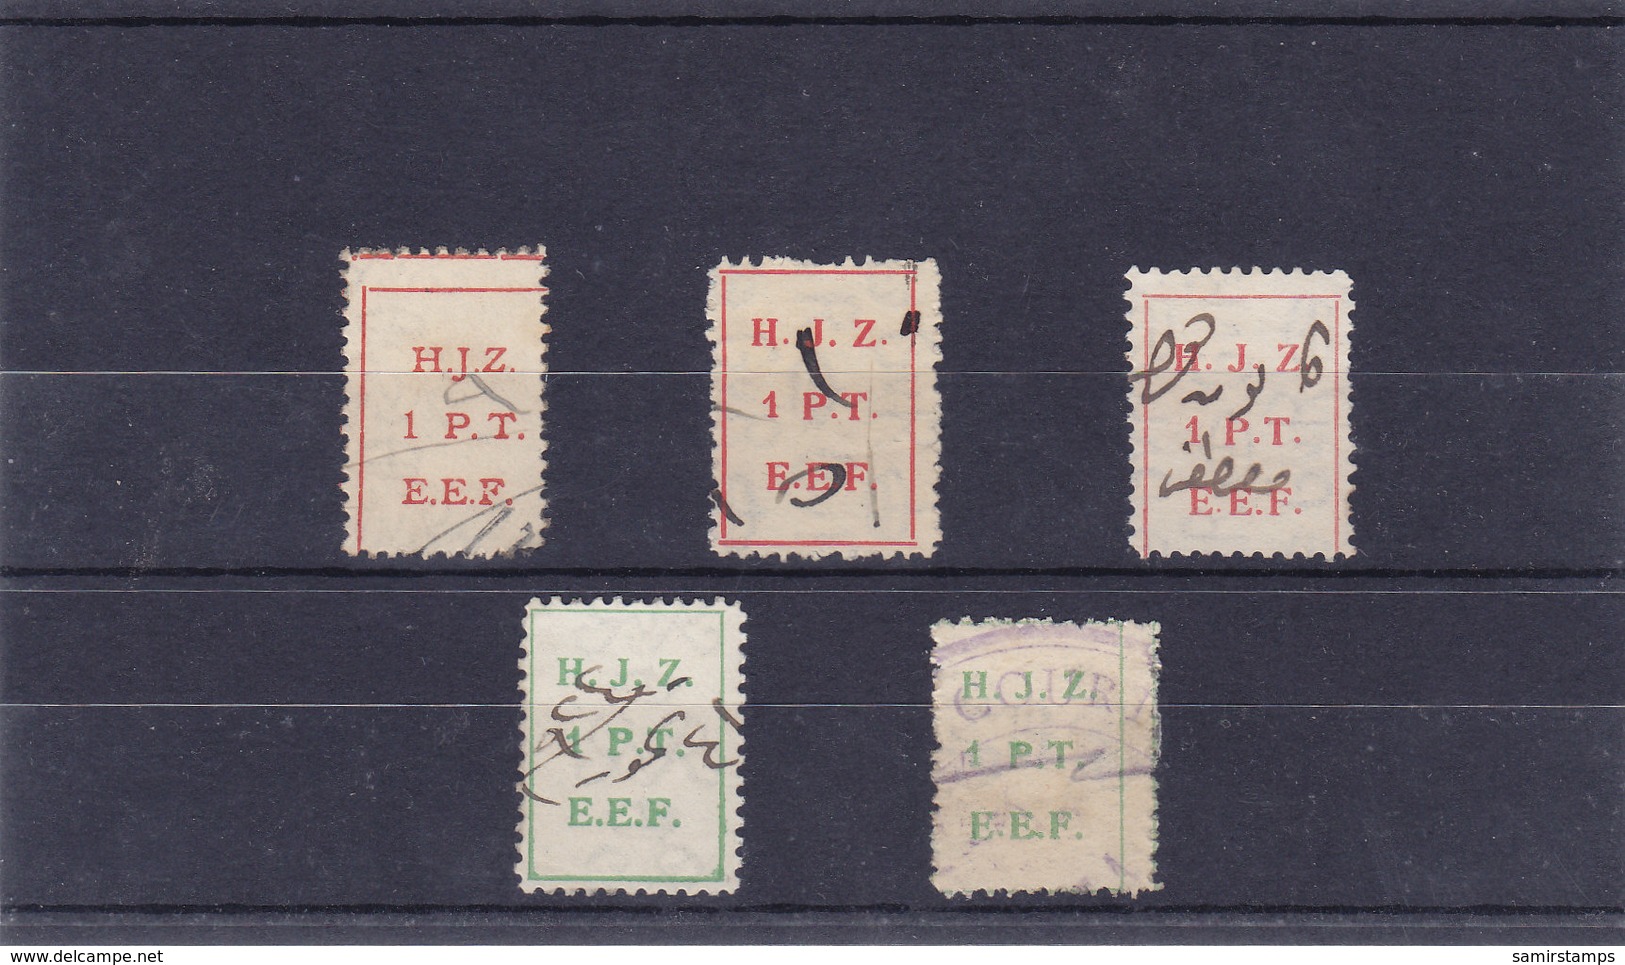 Palestine Revenue Hedaz Railways 5 Stamps Used, 1 PT  Red & Green,Diff Size,colors, EEF.Scarce- Red. Price- SKRILL ONLY - Palästina